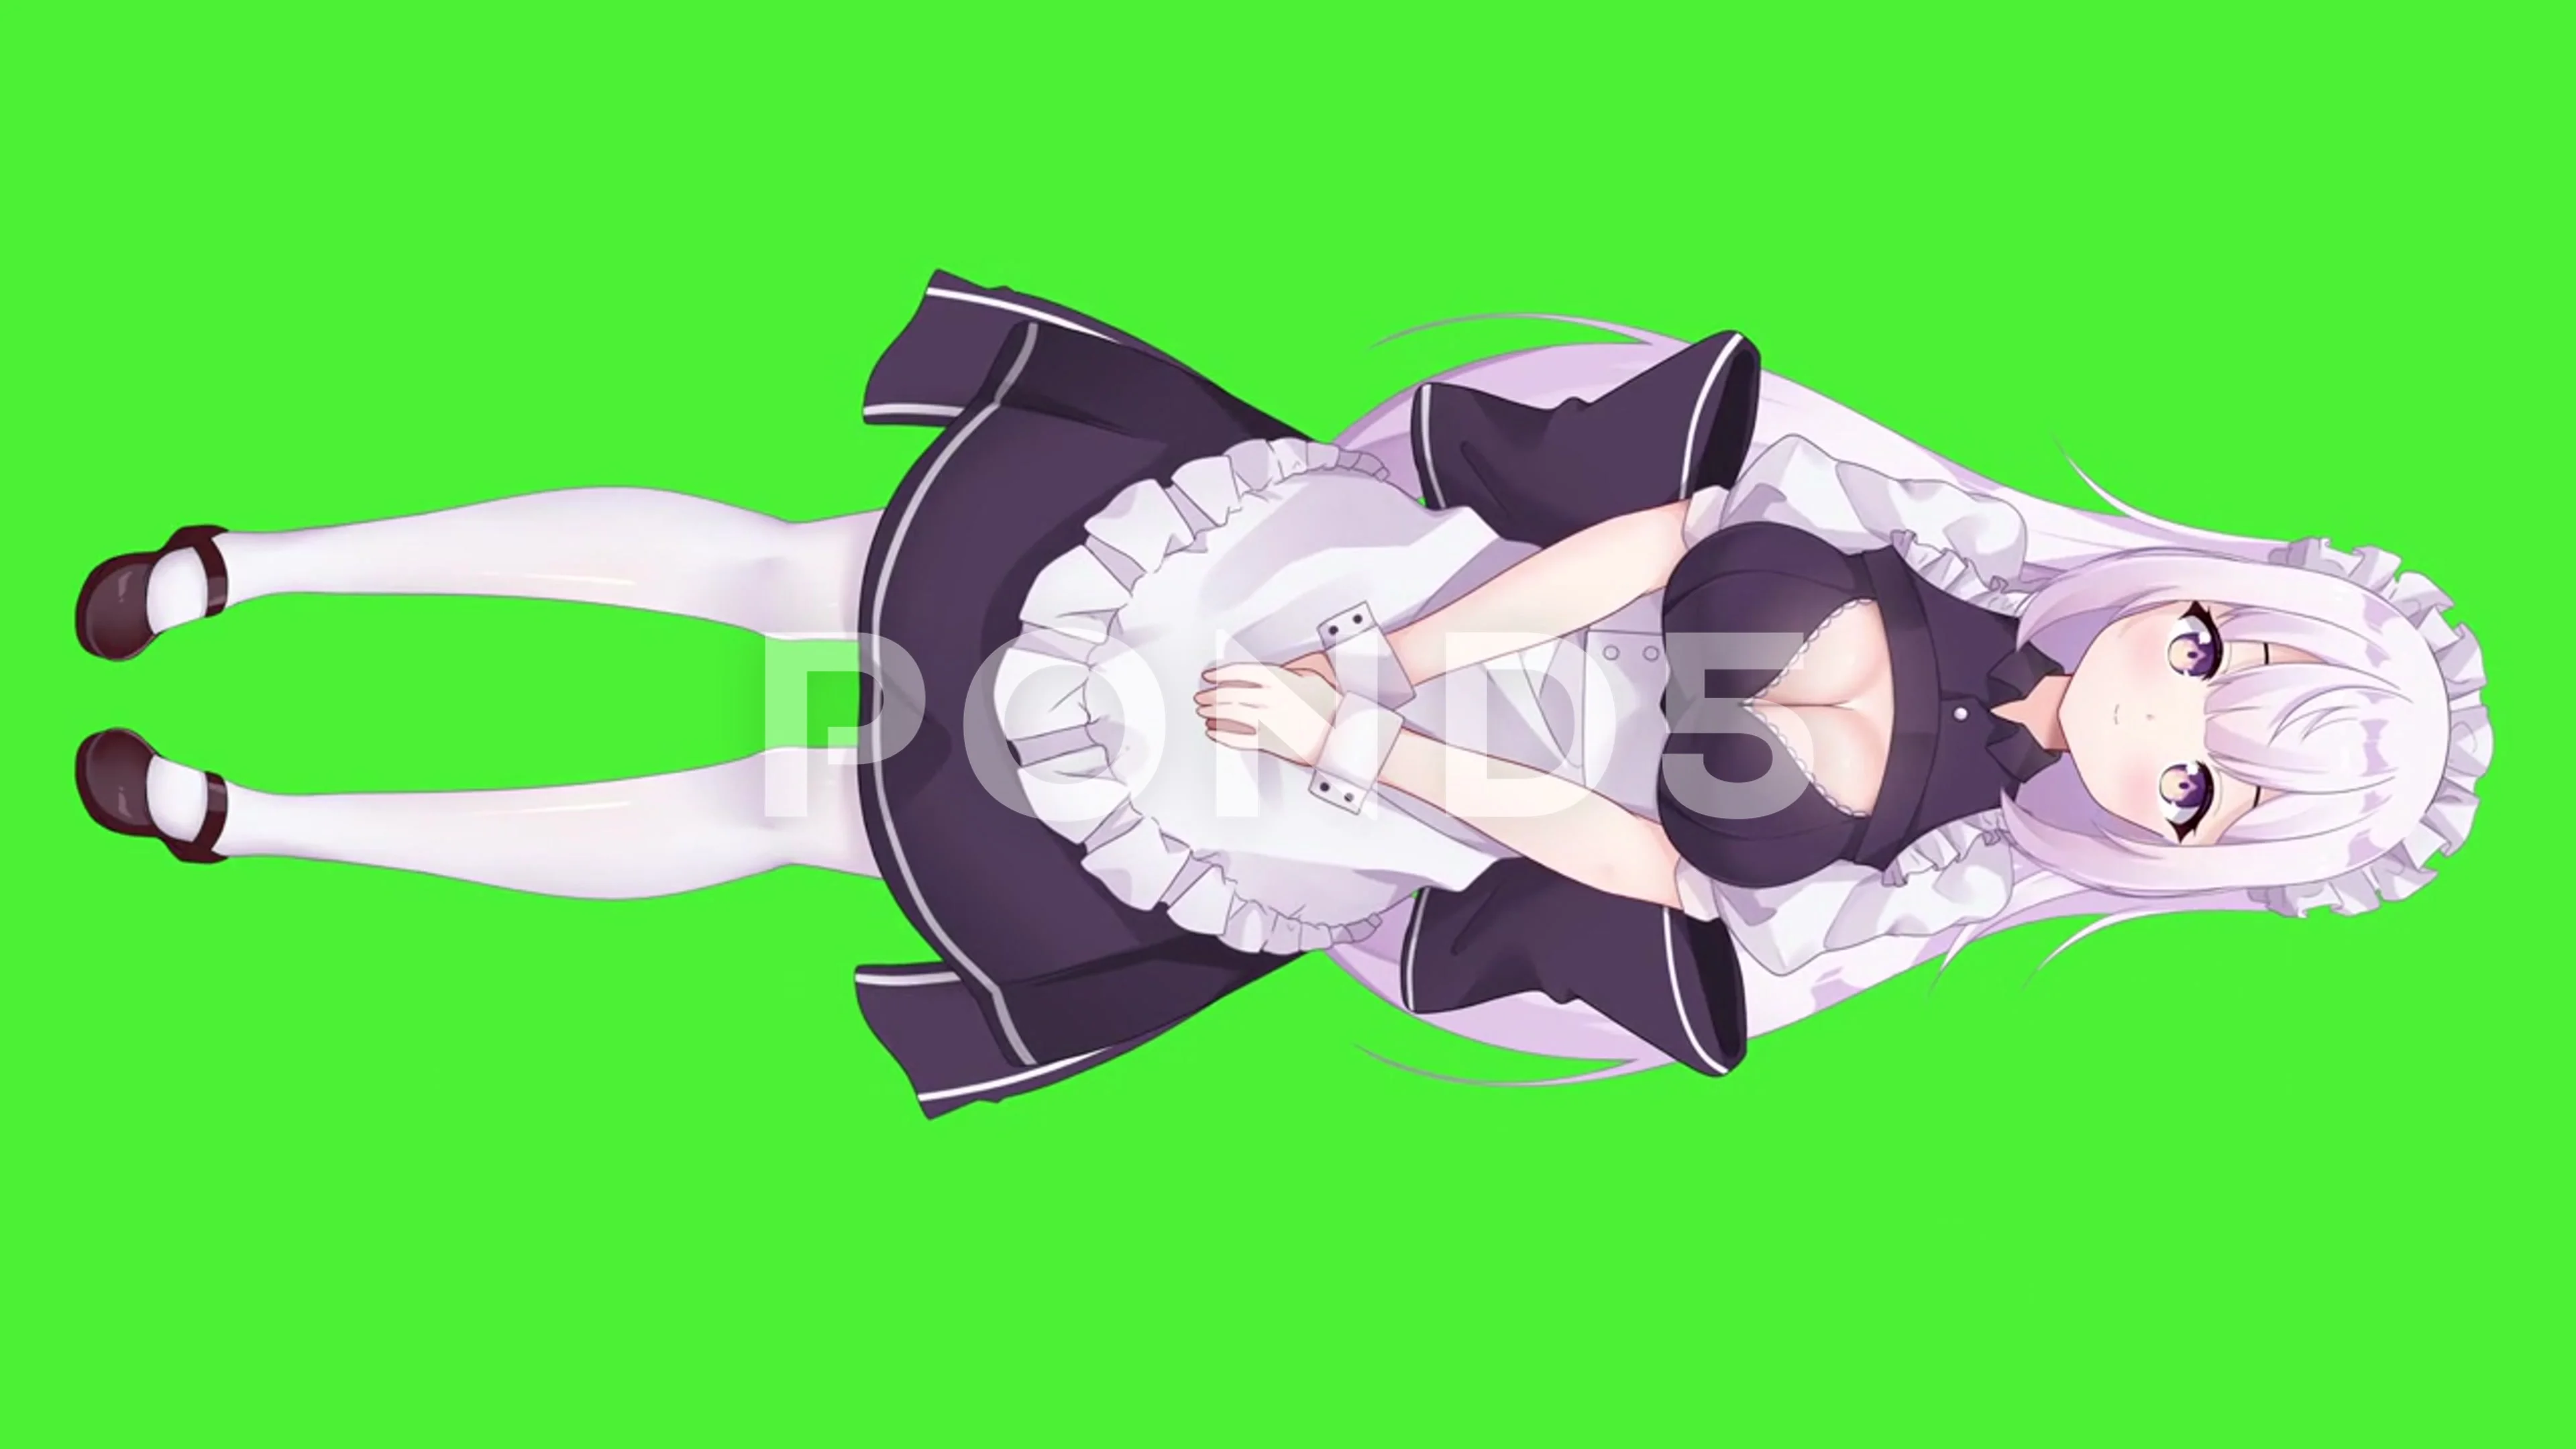 Anime Maid Hd Transparent Cat Maid Japanese Anime Female Character  Cosplay Cat Maid Coffee Restaurant PNG Image For Free Download